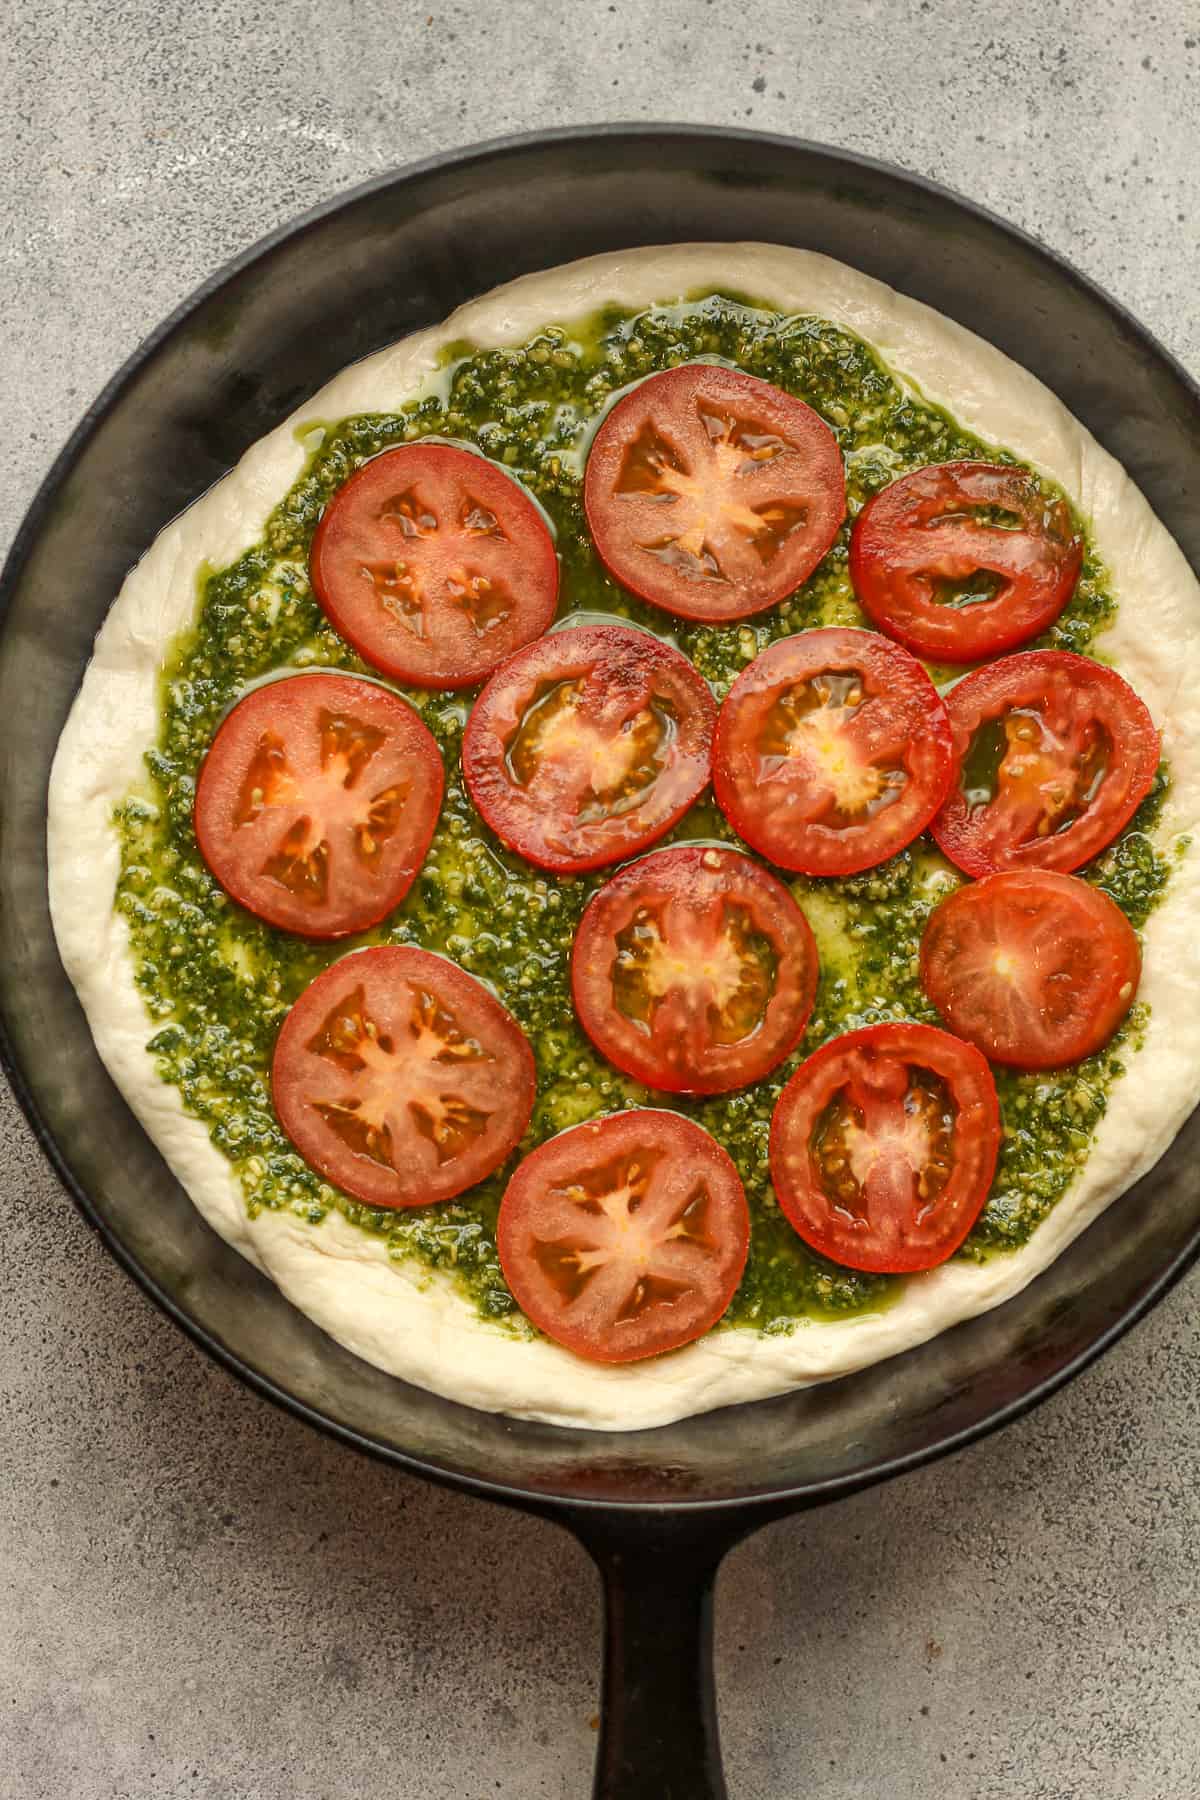 A skillet of the dough with pesto sauce and sliced tomatoes.